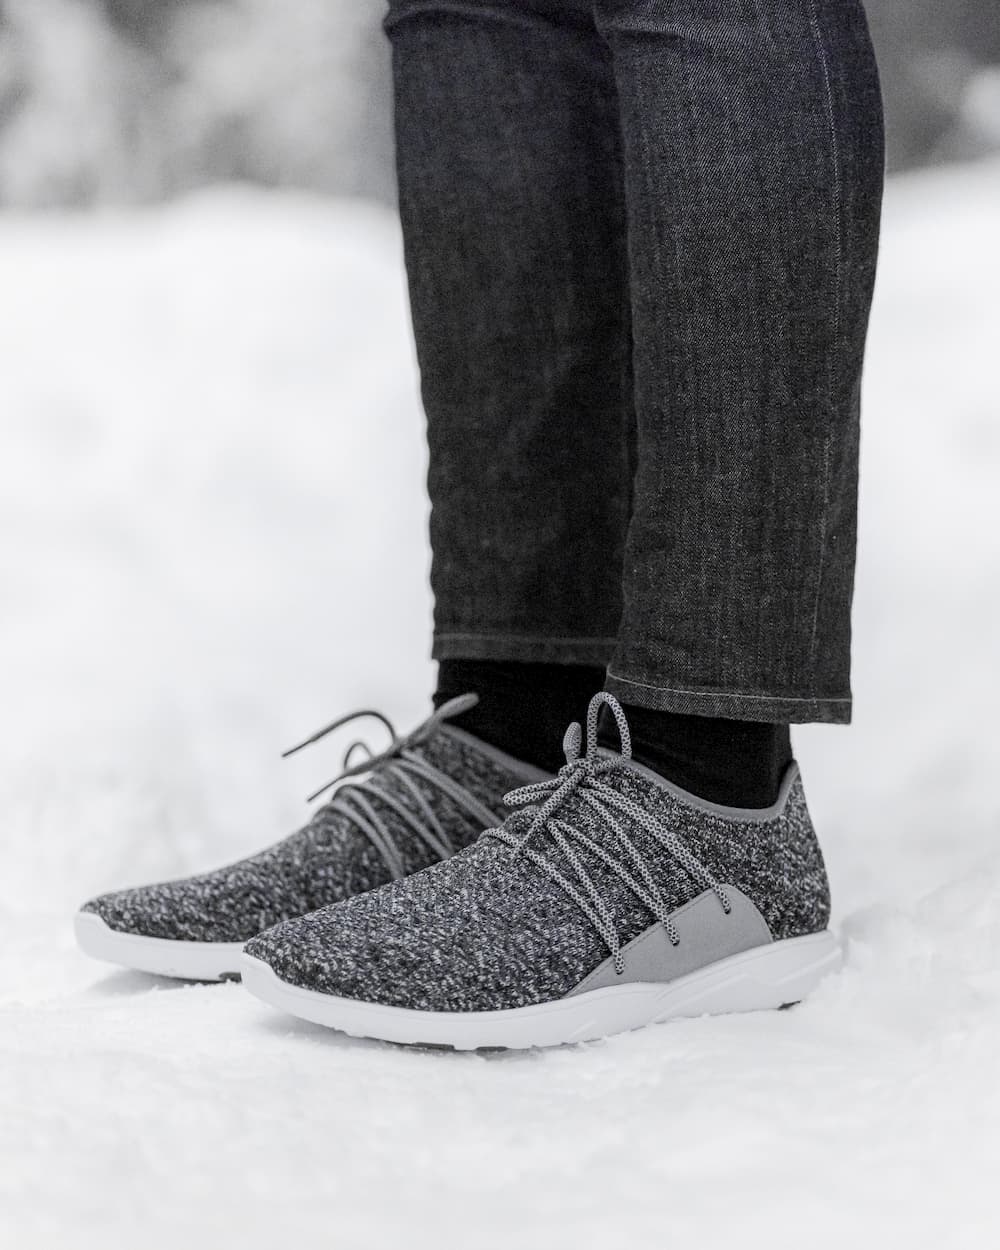 Snow Proof Shoes? Hekk yes.